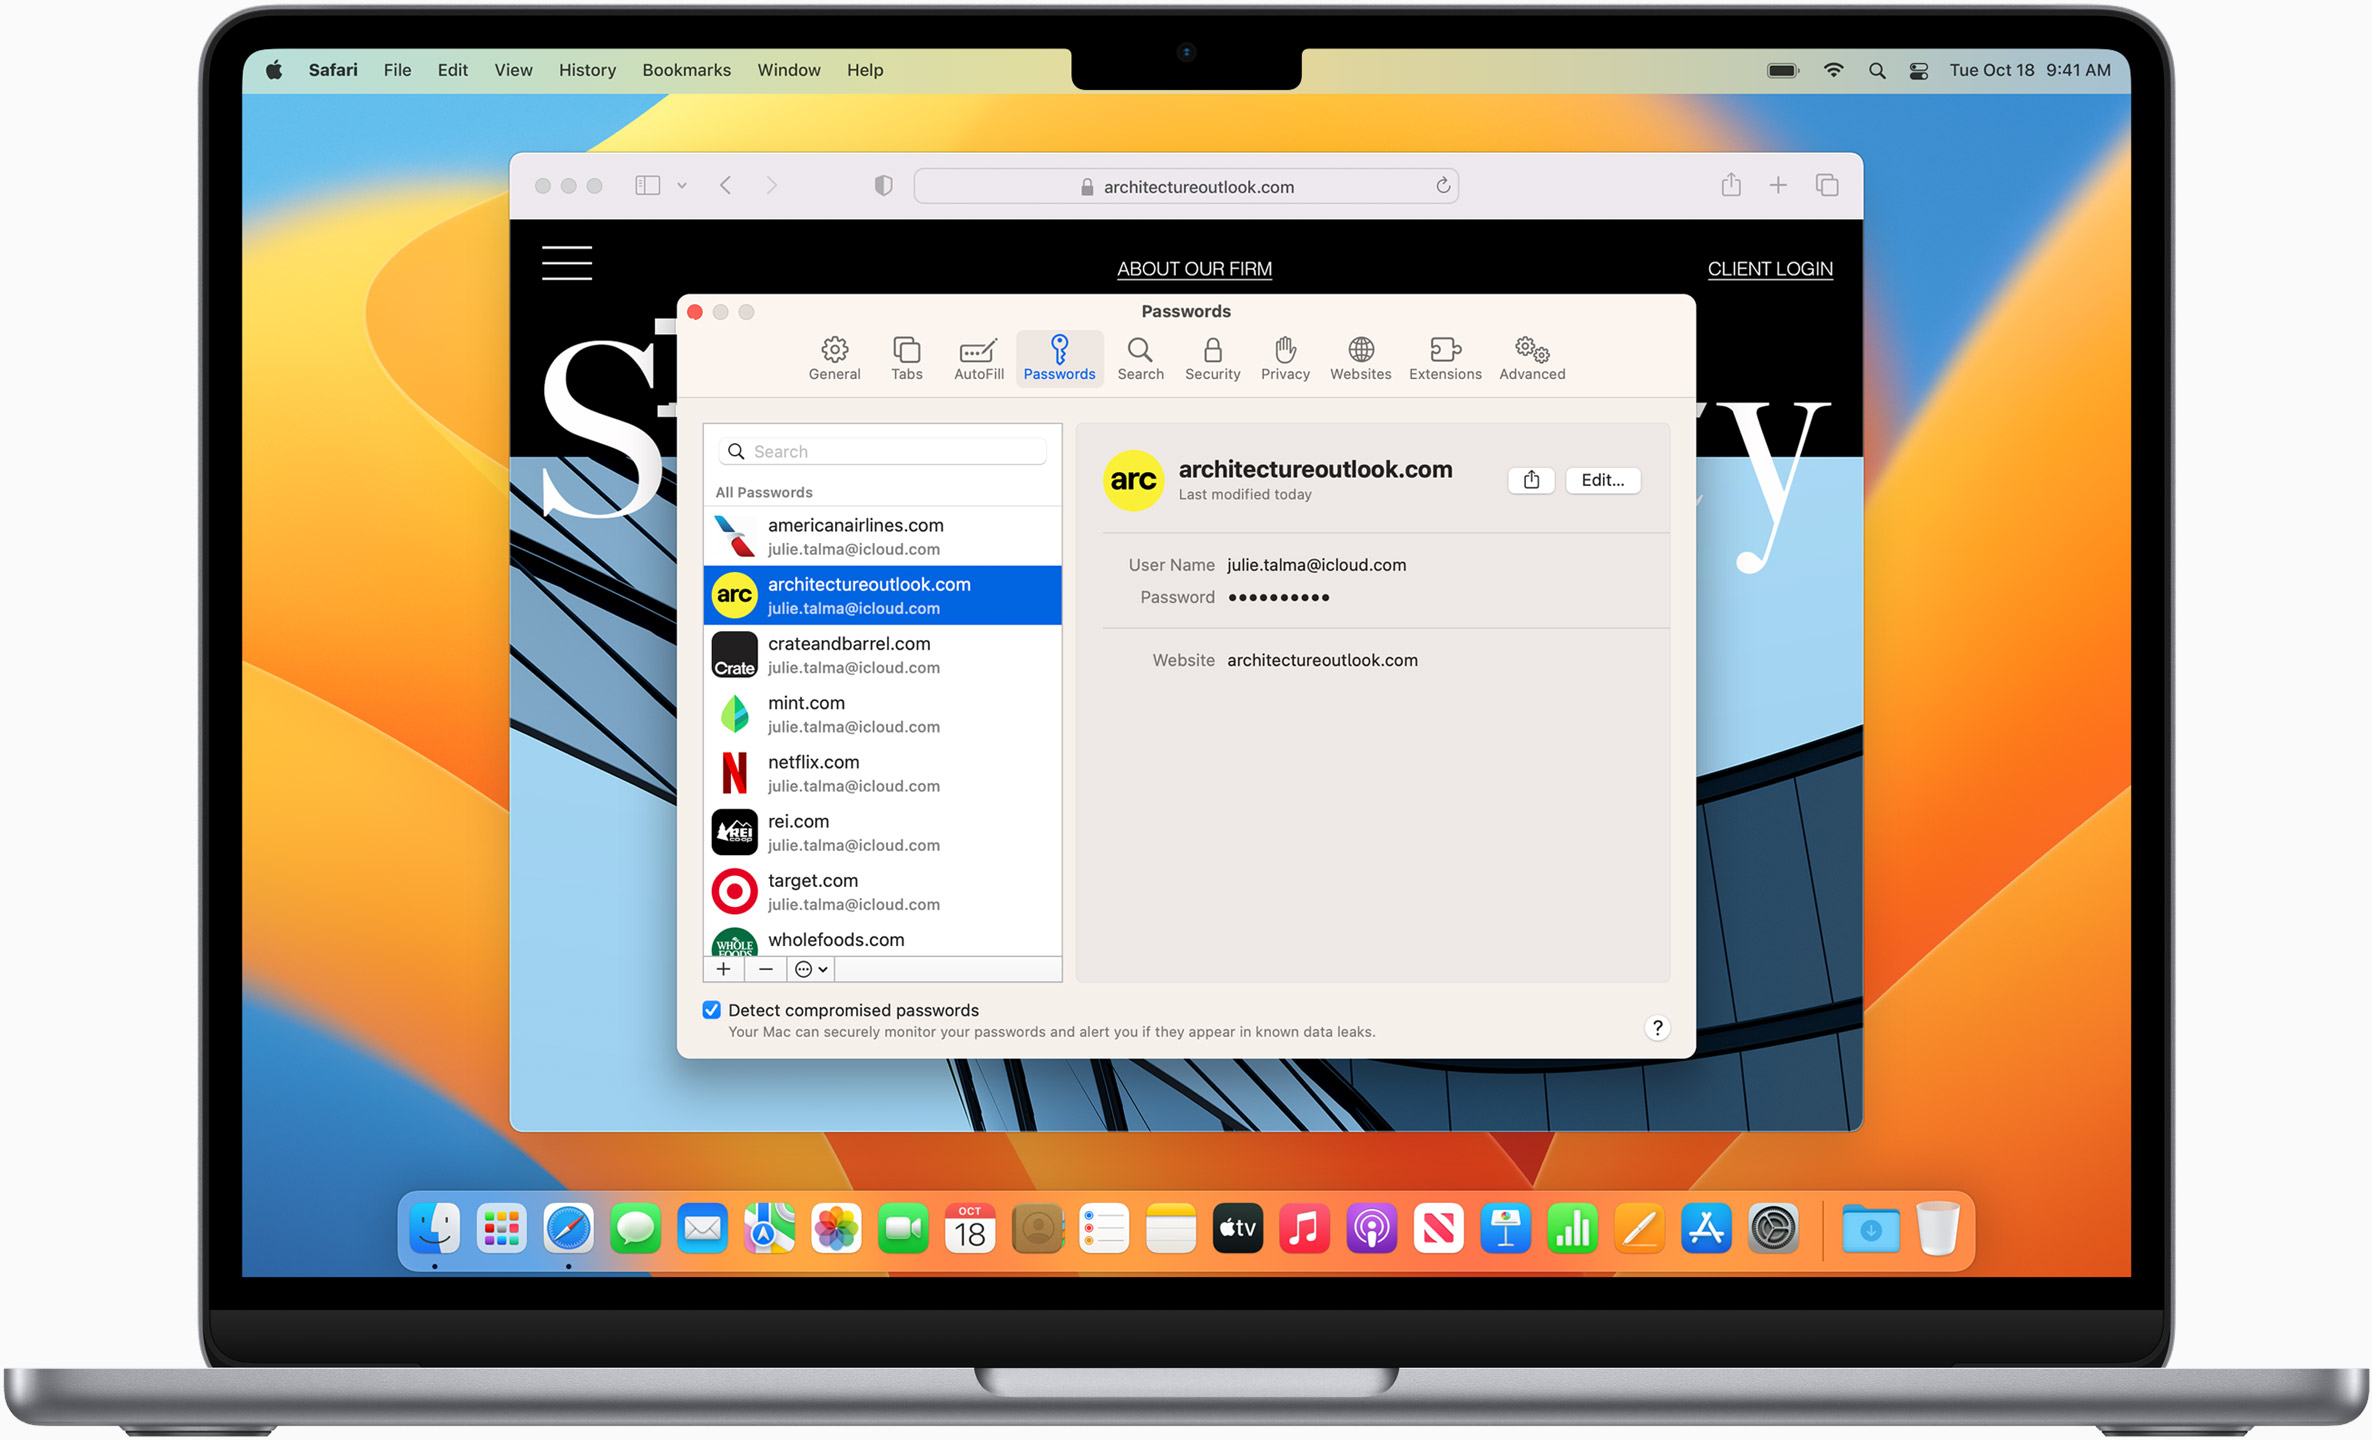 download the last version for mac AllDup 4.5.50